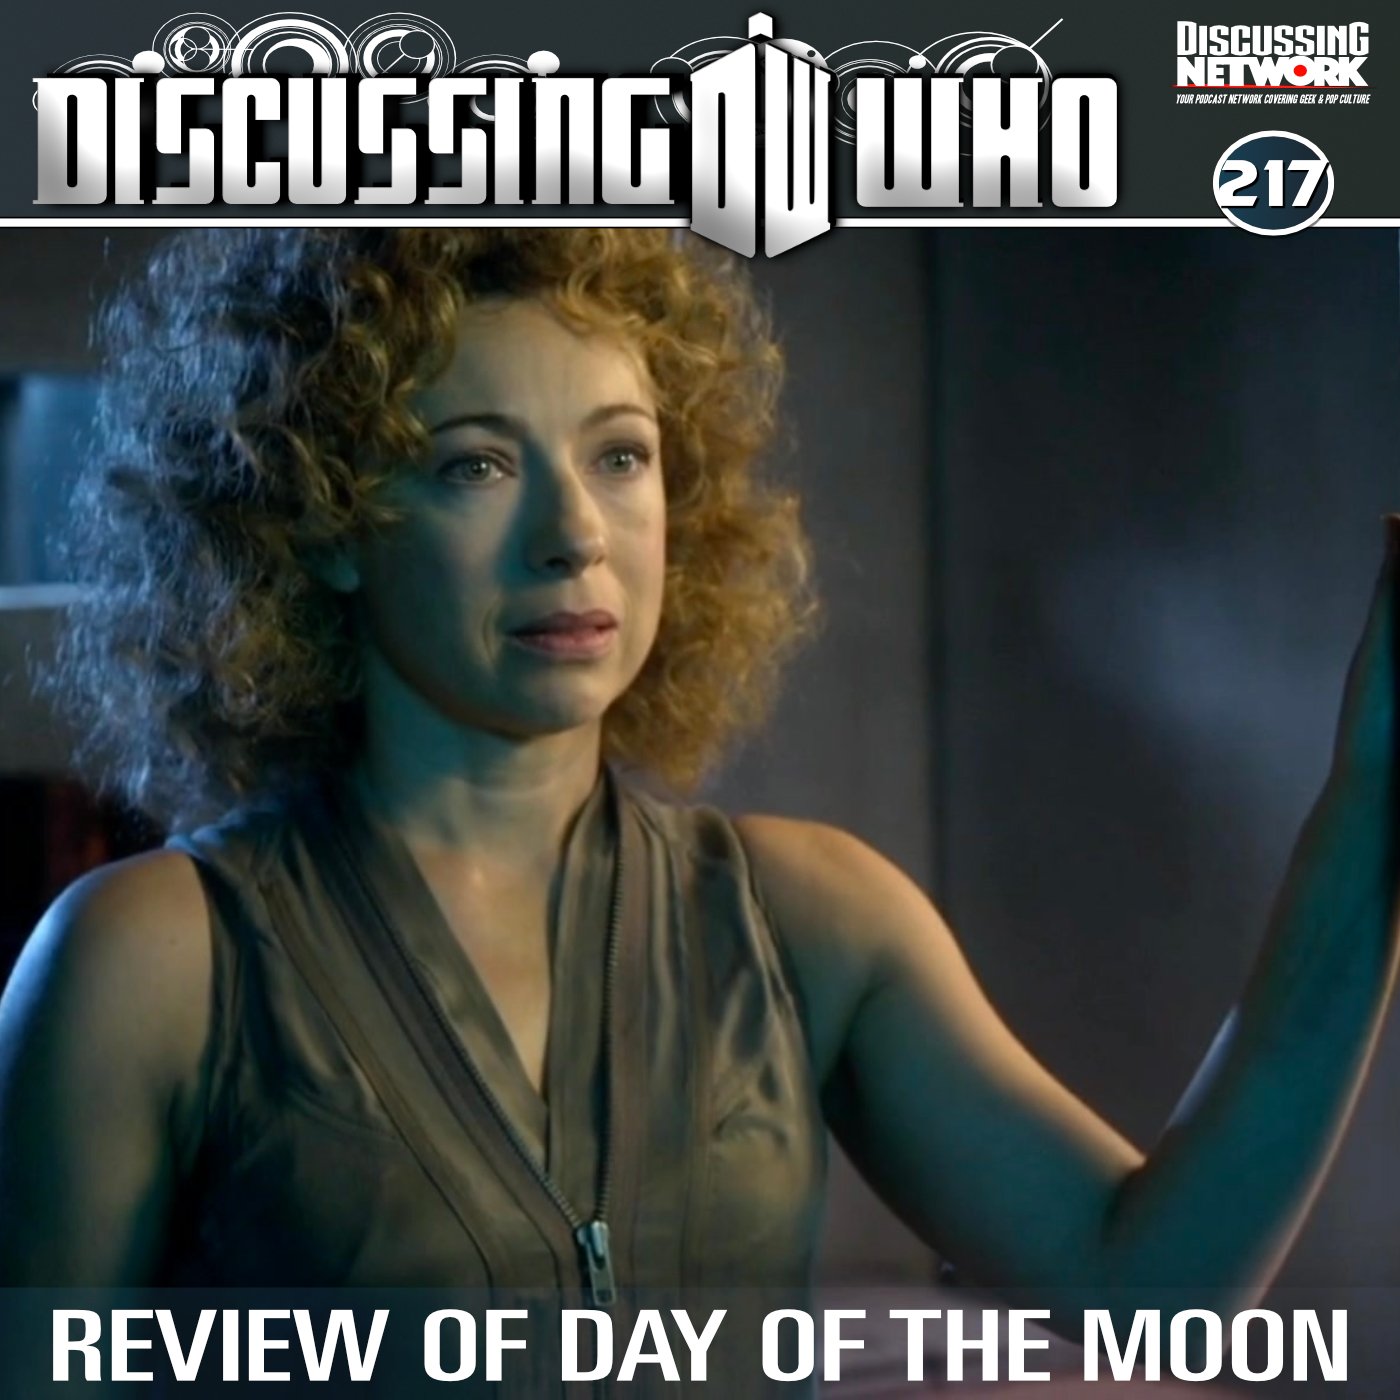 Discussing Who Review of Day of the Moon